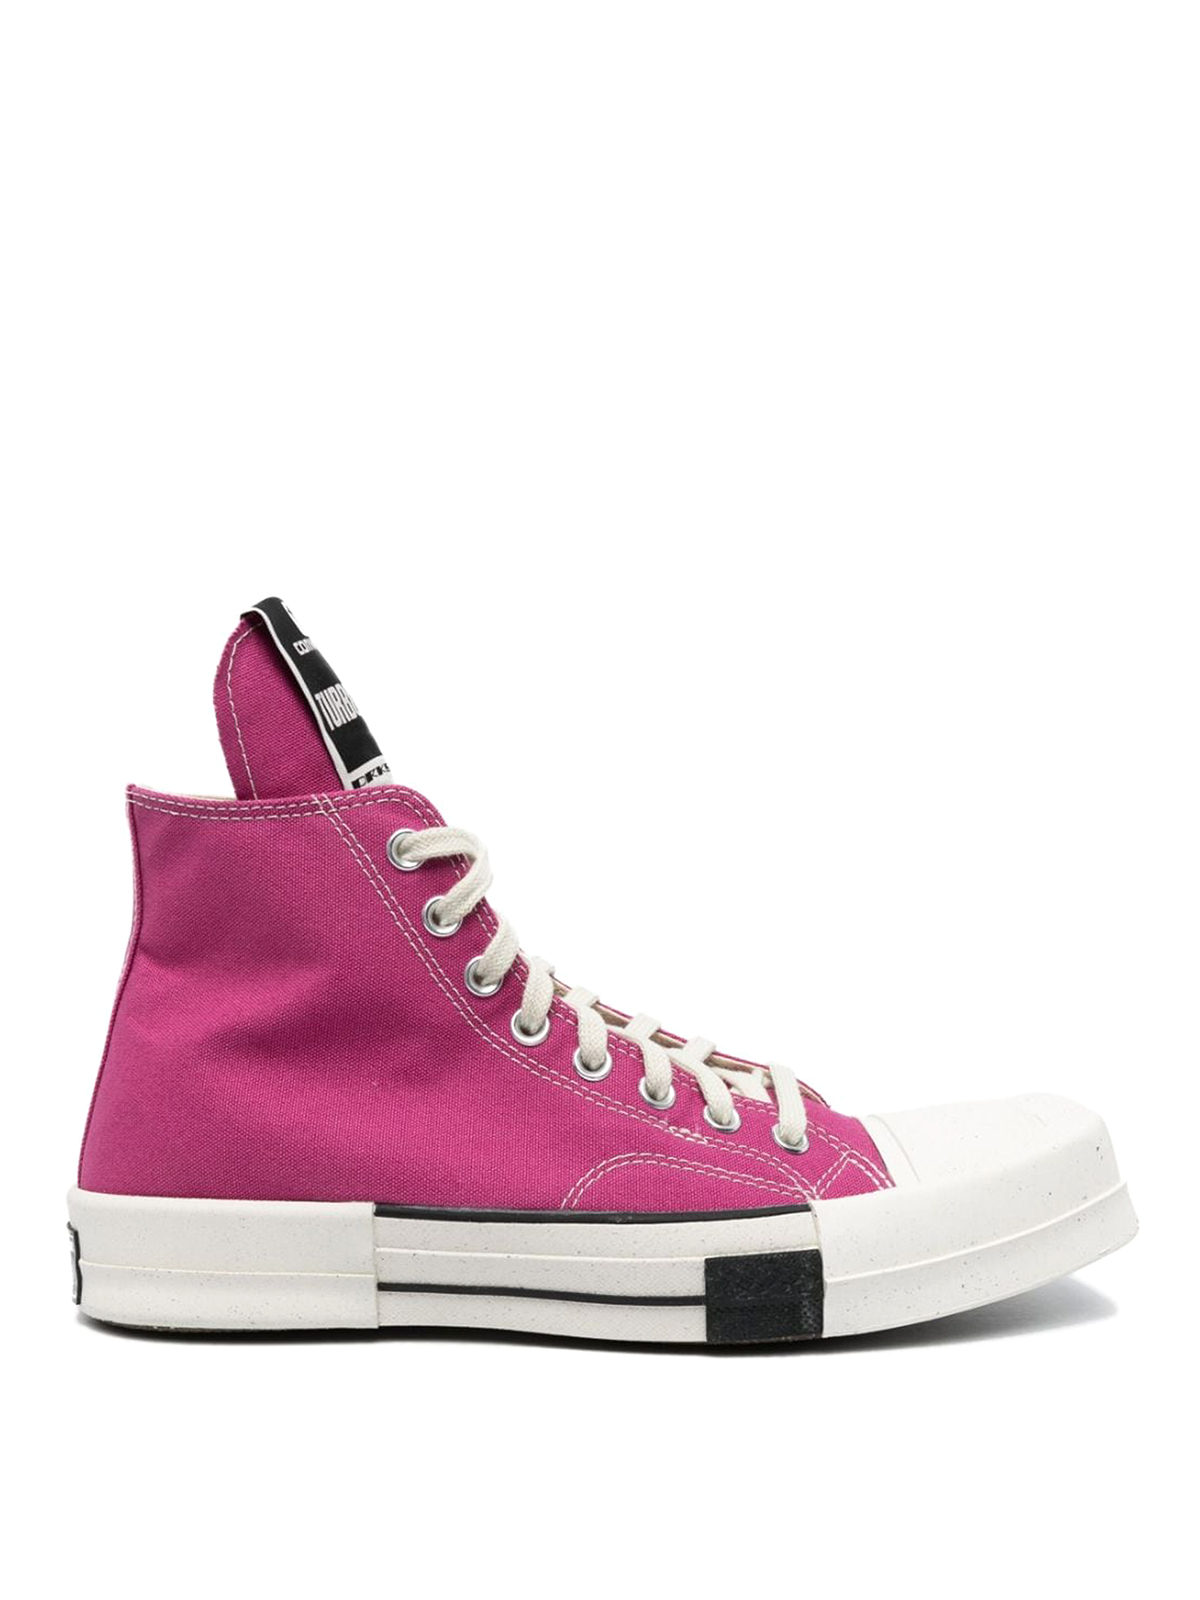 Converse X Drkshwd Flat Shoes Pink In Cactus Flower